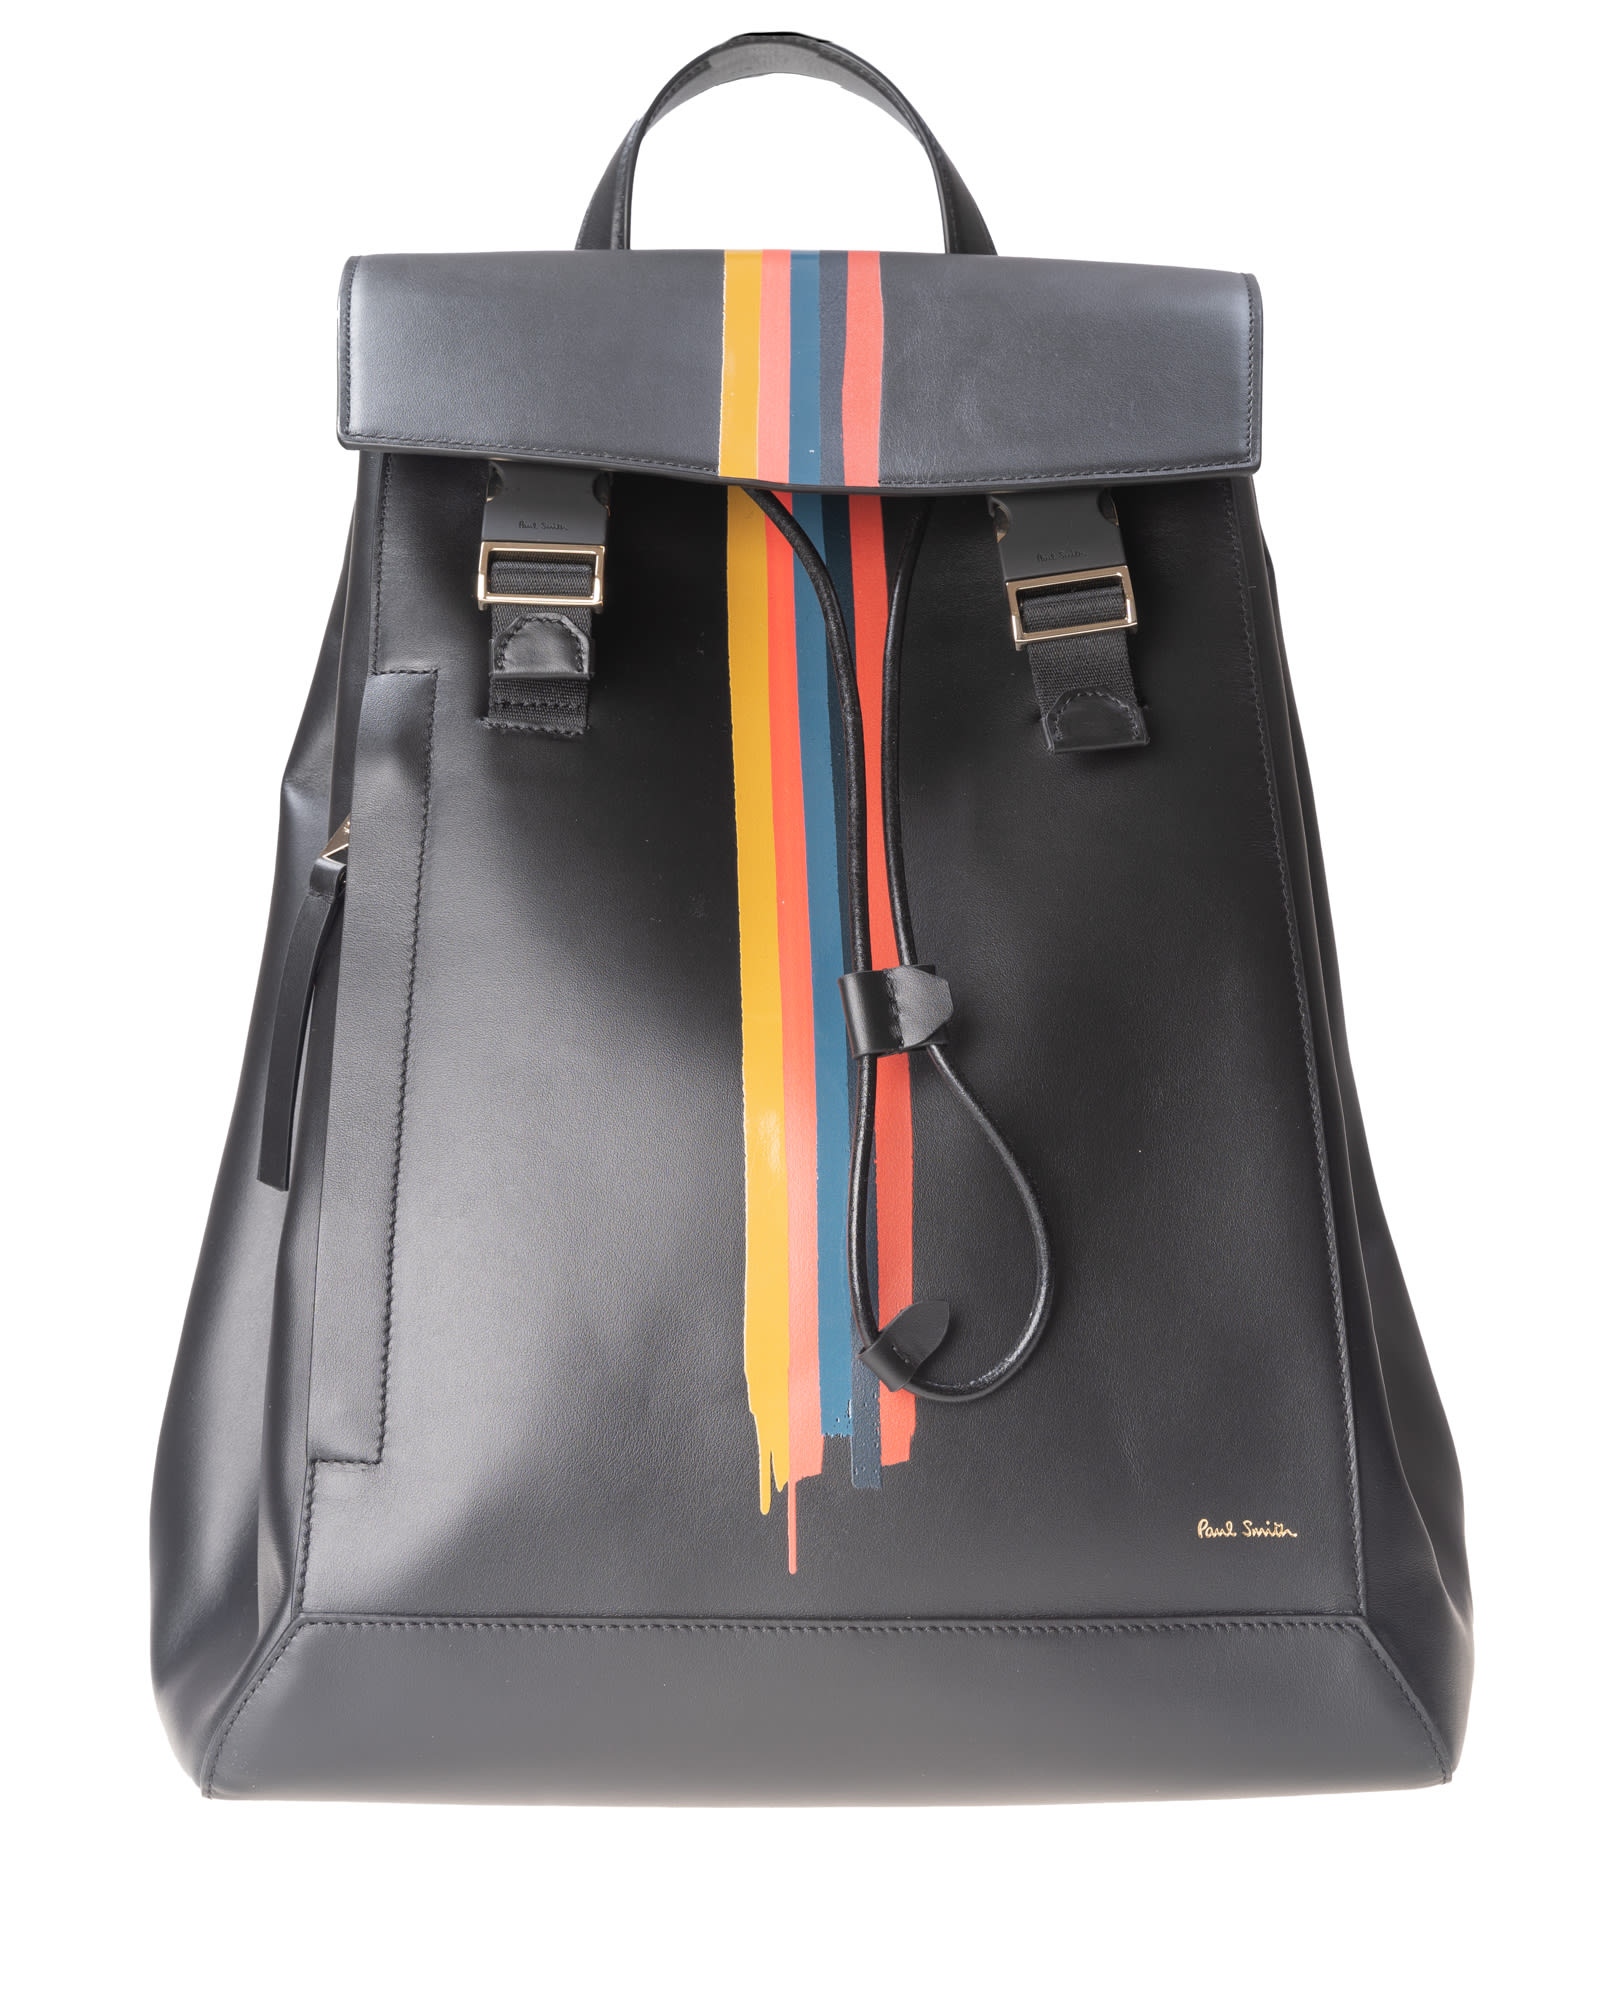 Paul Smith Painted Stripe backpack